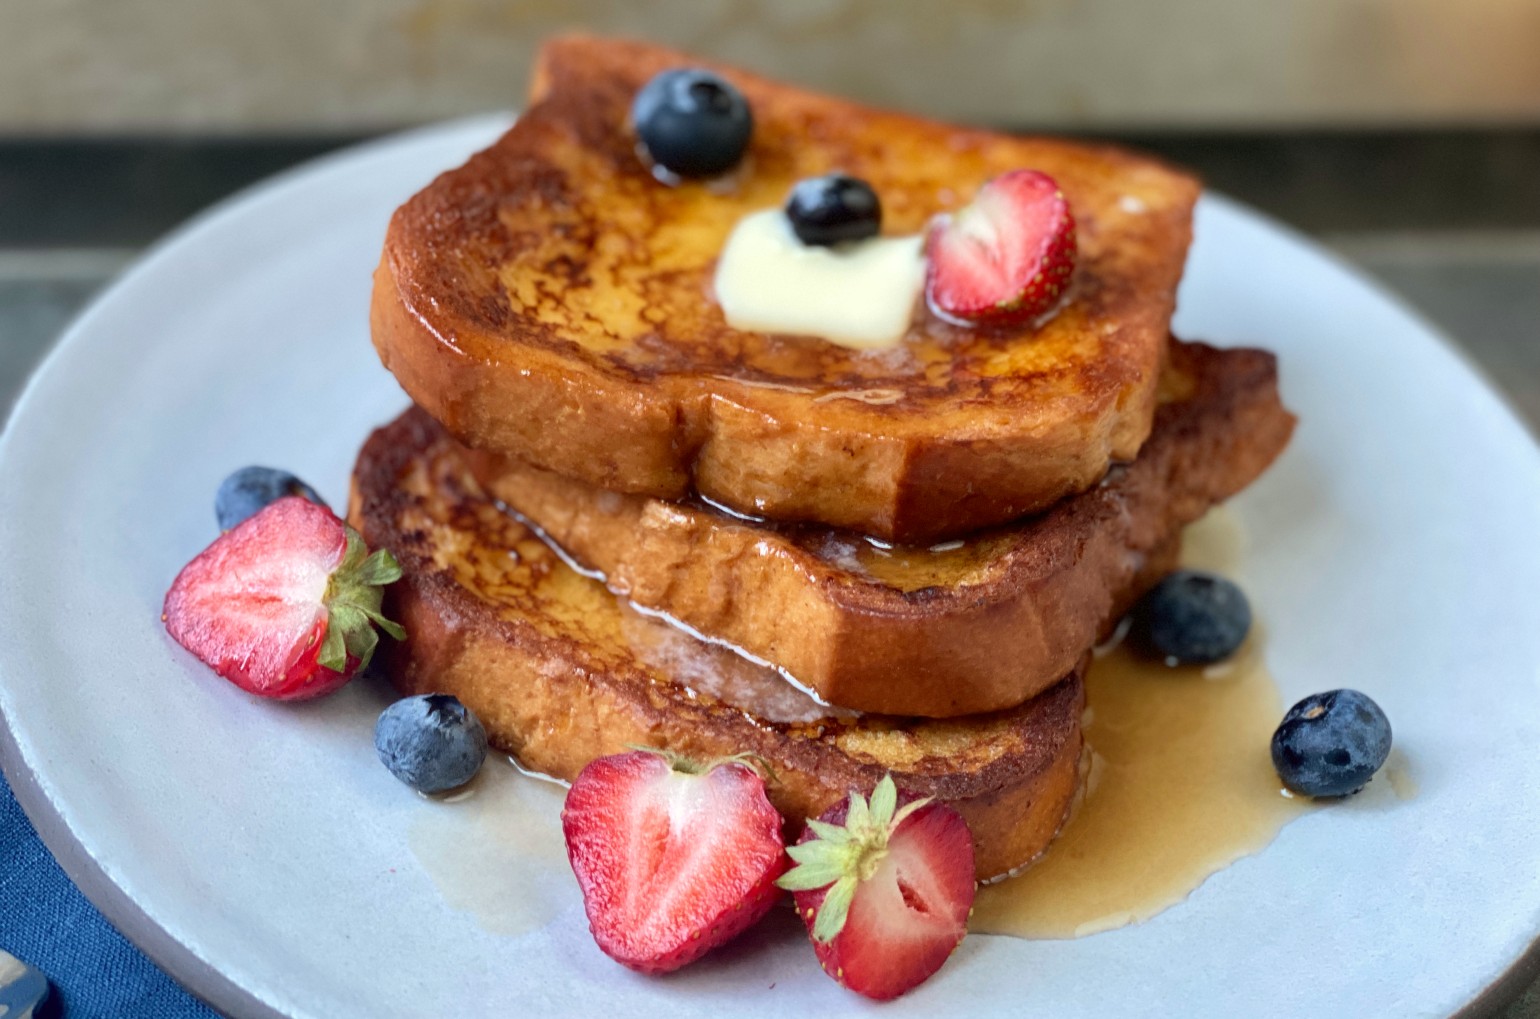 French toast slices stacked high and topped with syrup, a pat of butter, strawberries and blueberries.